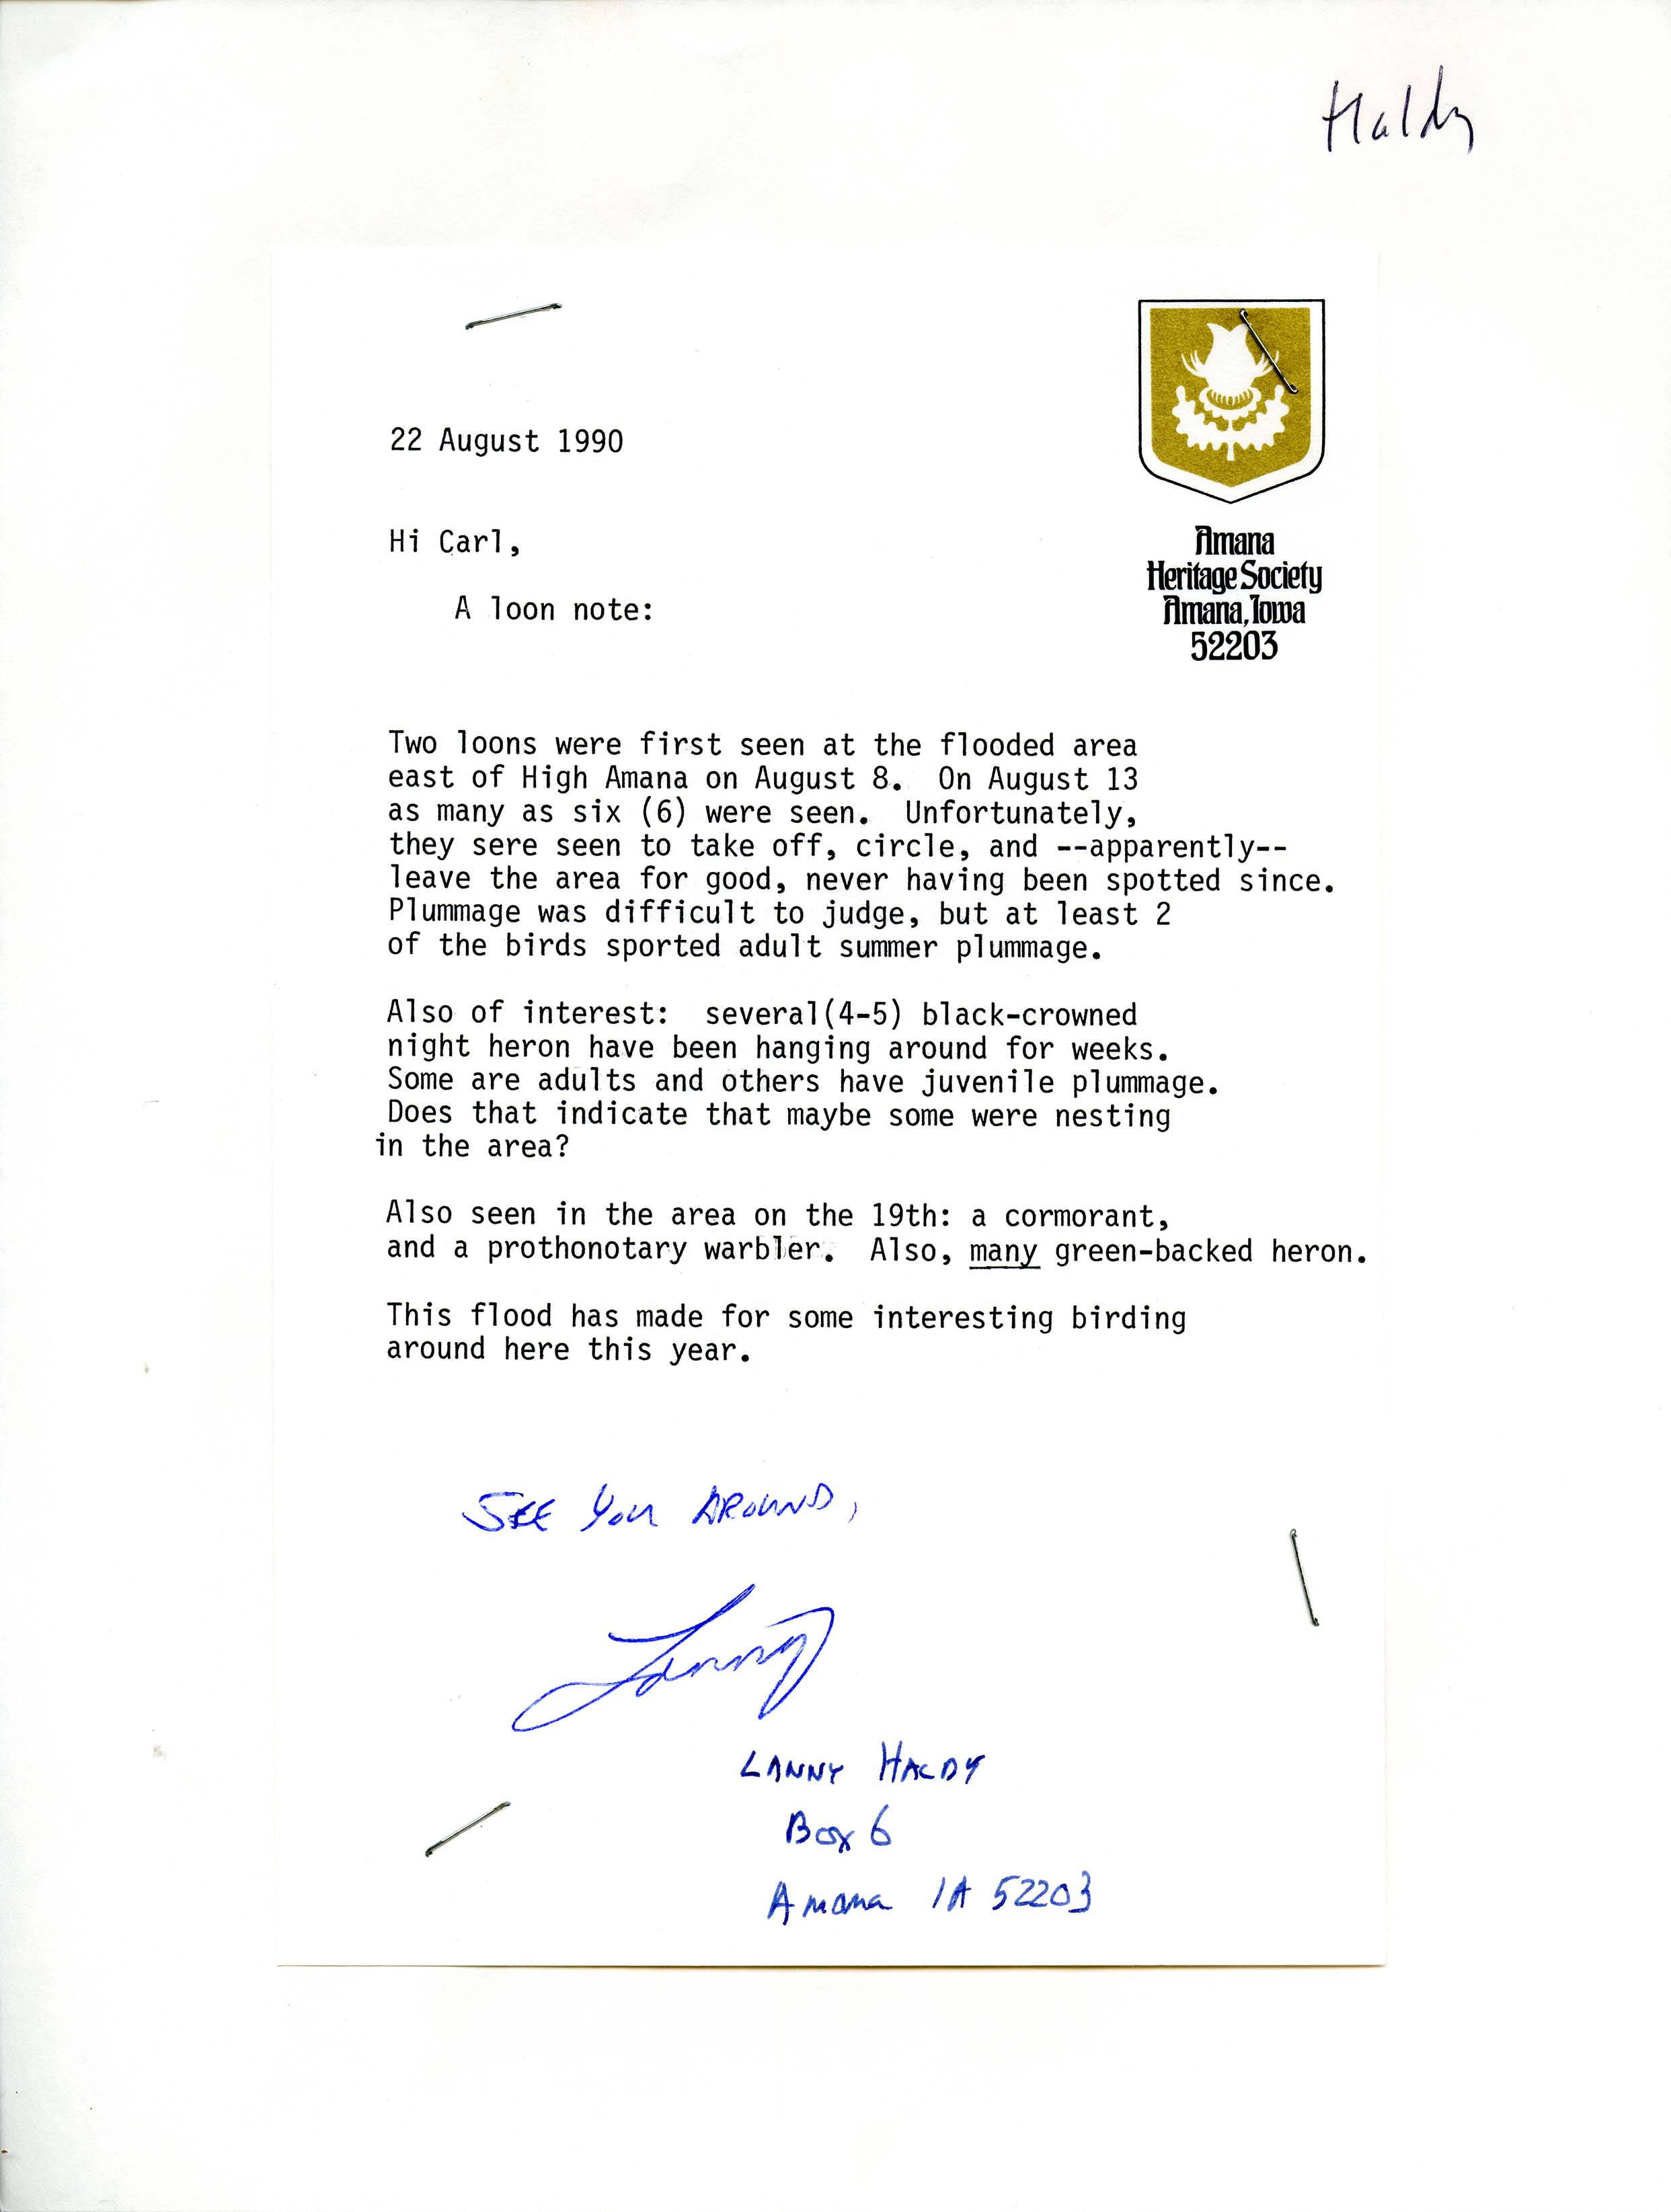 Lanny Haldy letter to Carl Bendorf regarding bird sightings for the Amana, IA area, August 22, 1990